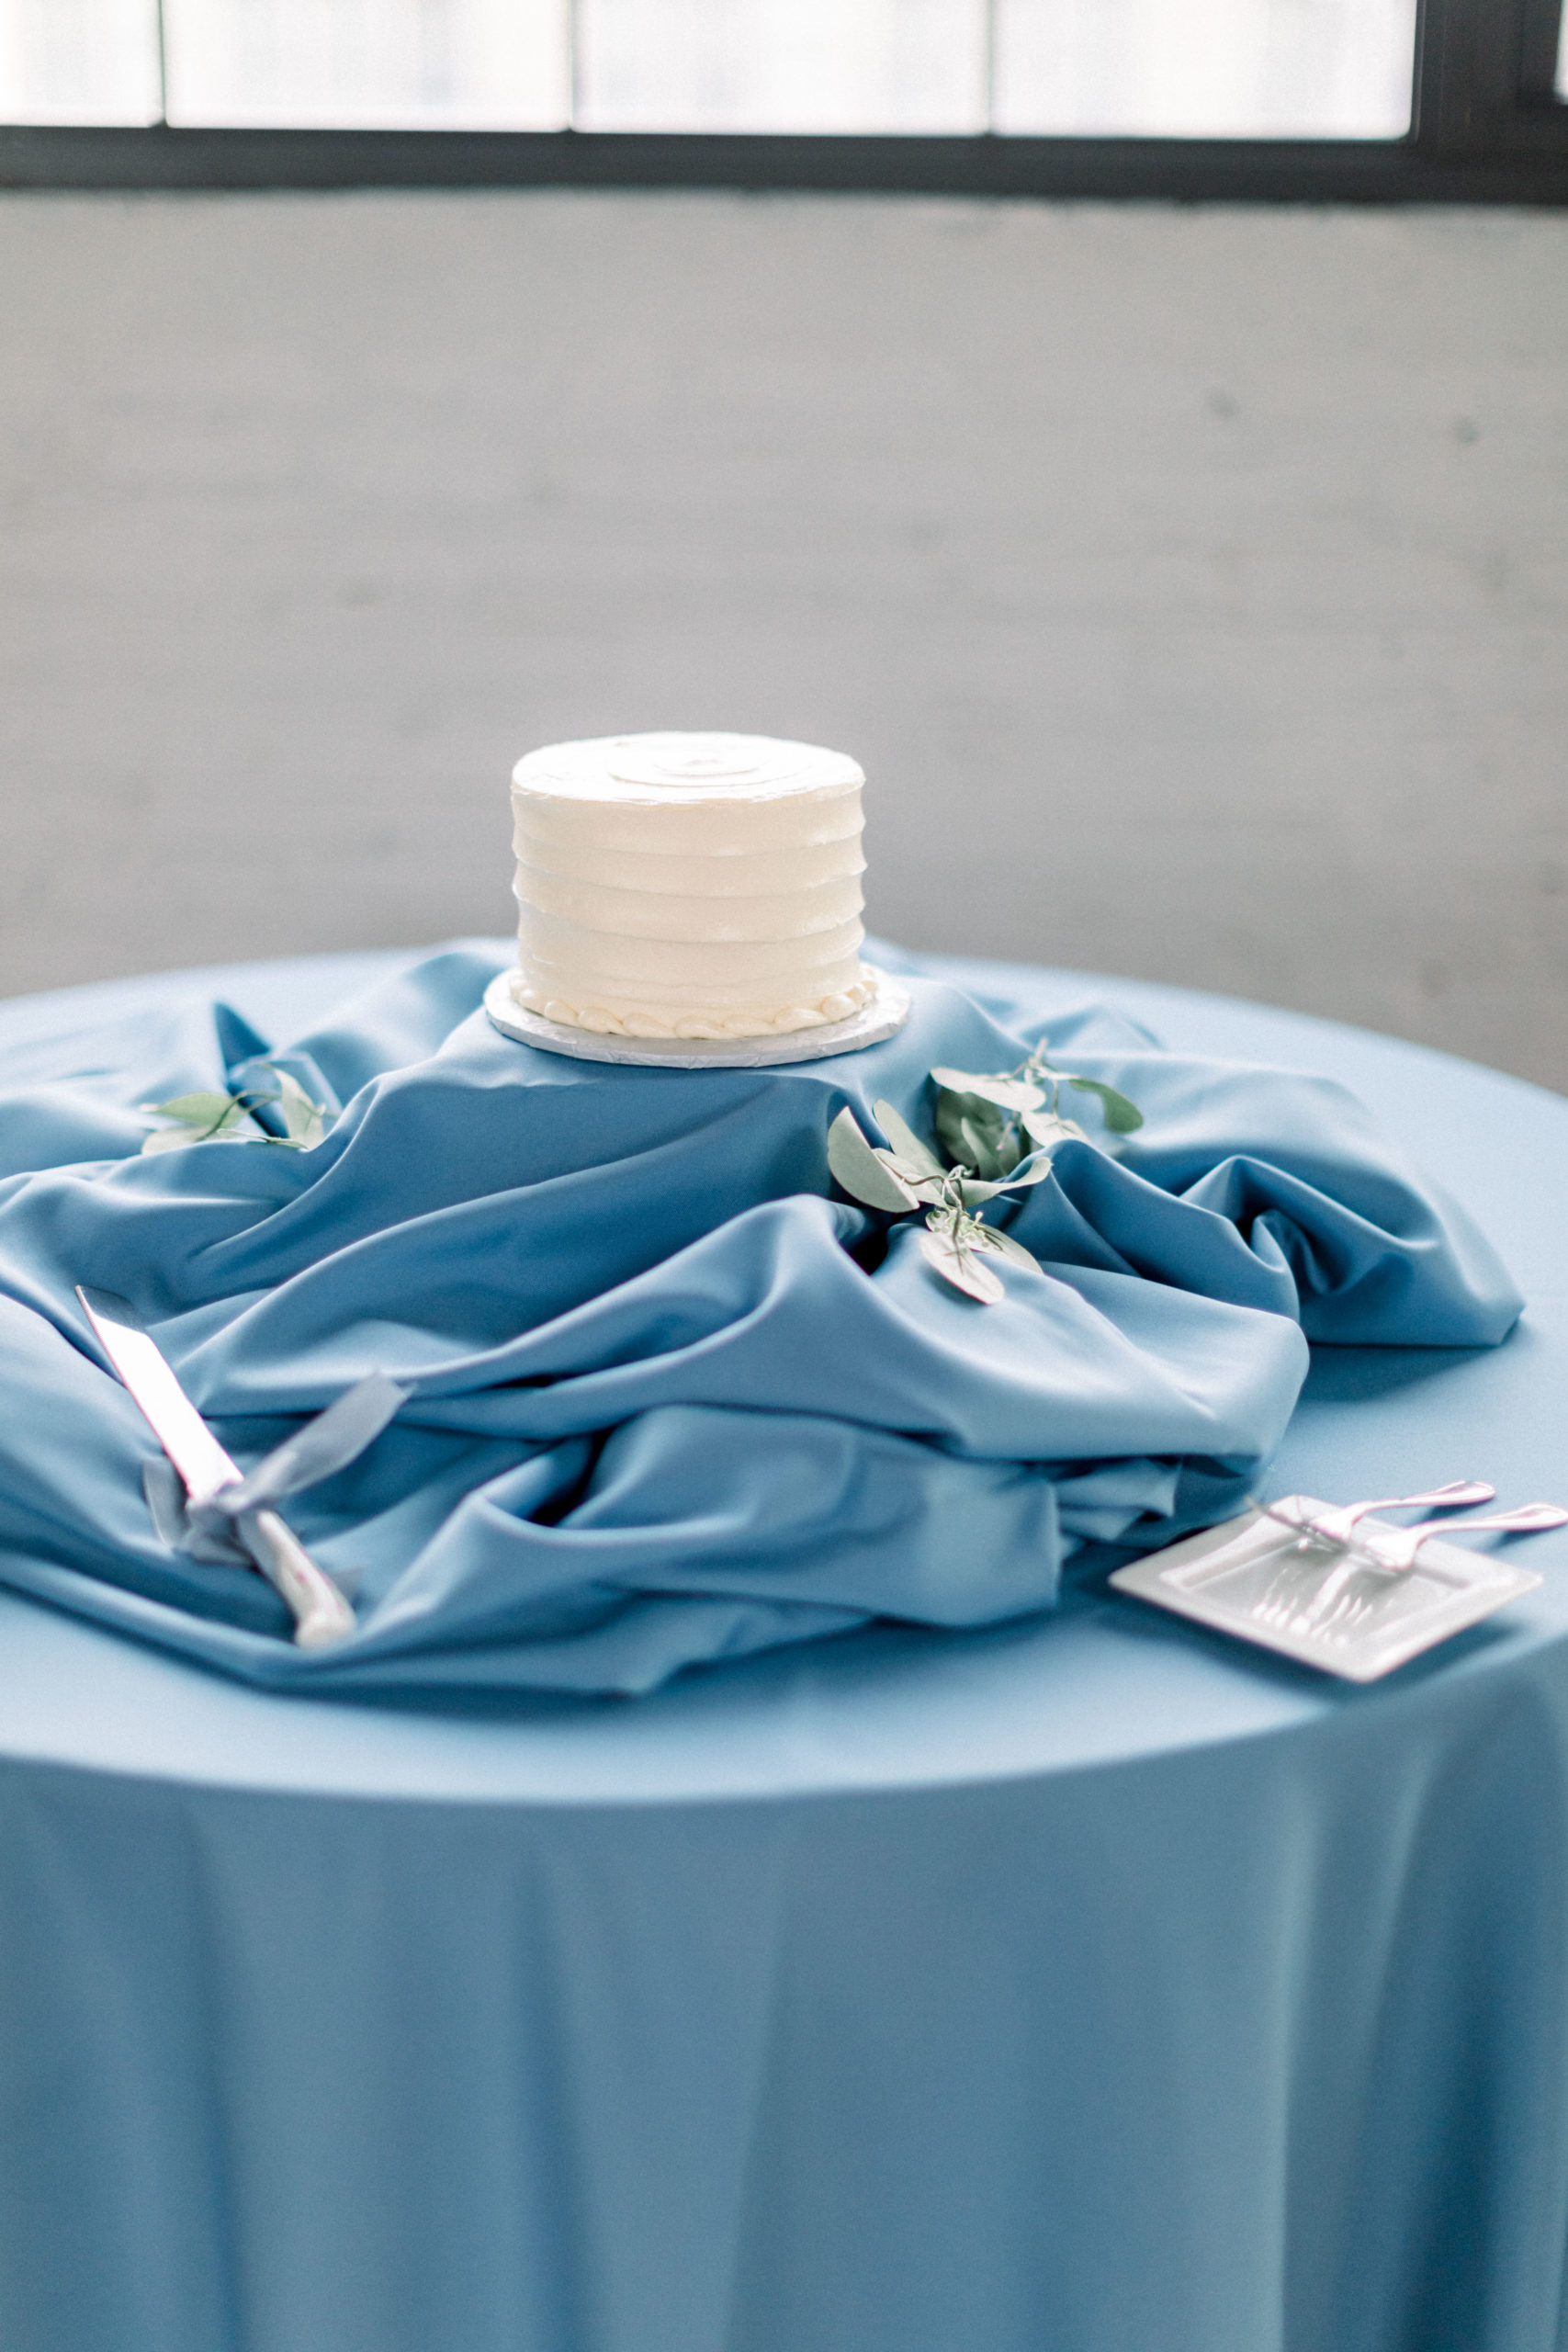 blue tablecloth with white cake sitting on top for cake cutting